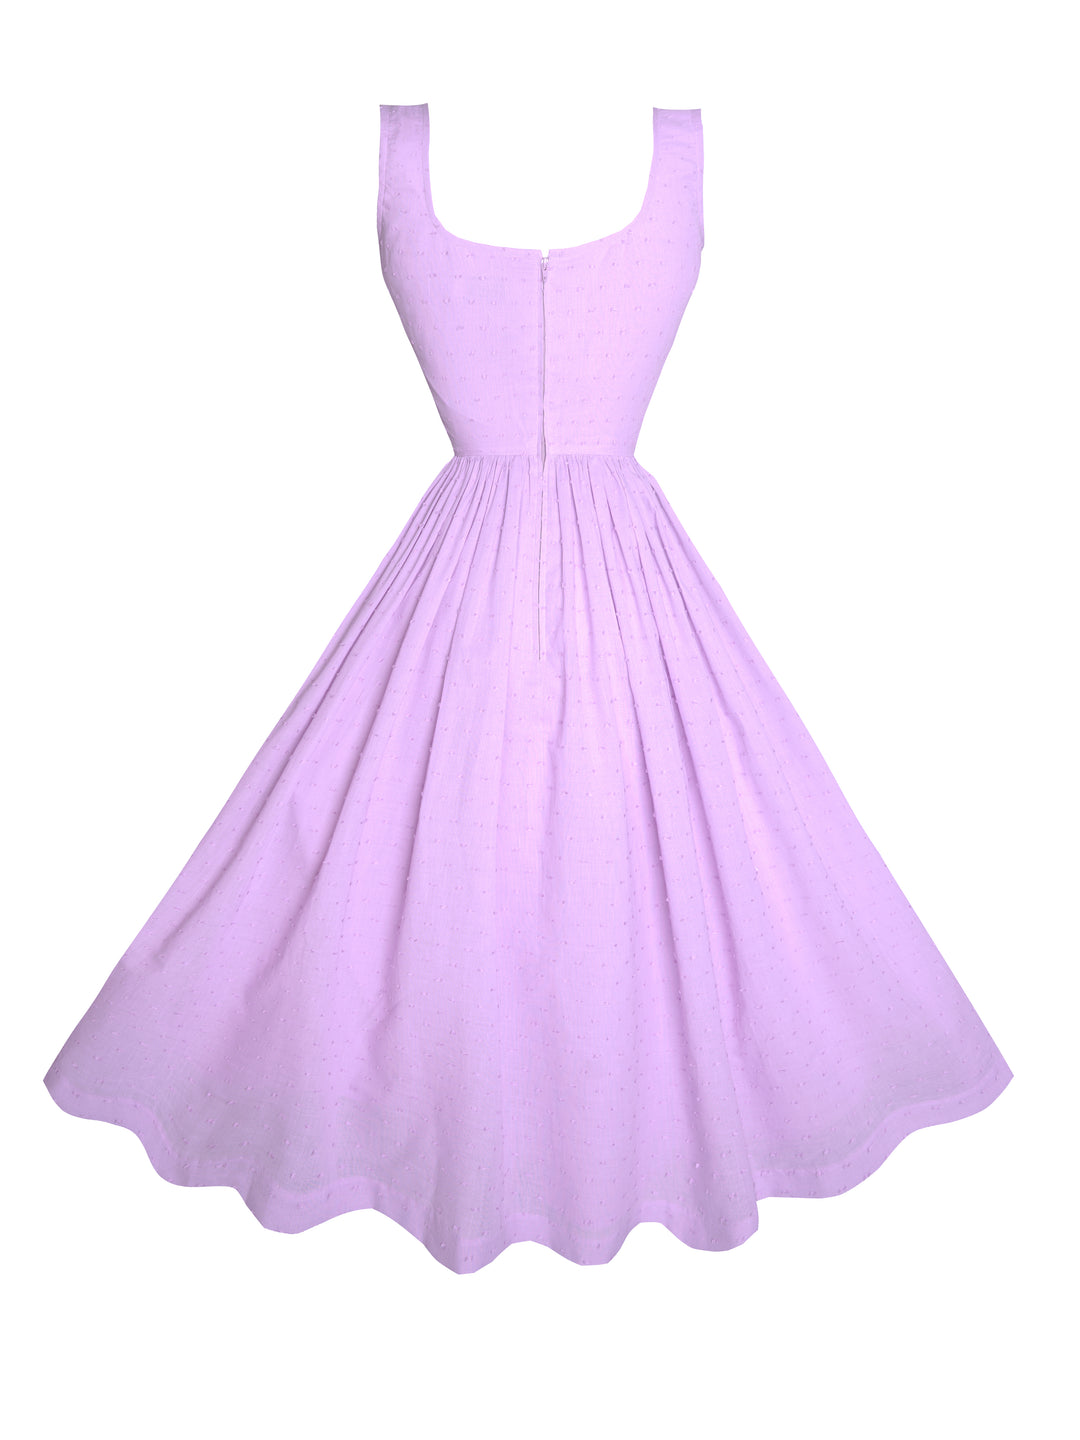 MTO - Michelle Dress Lavender "Dotted Swiss"